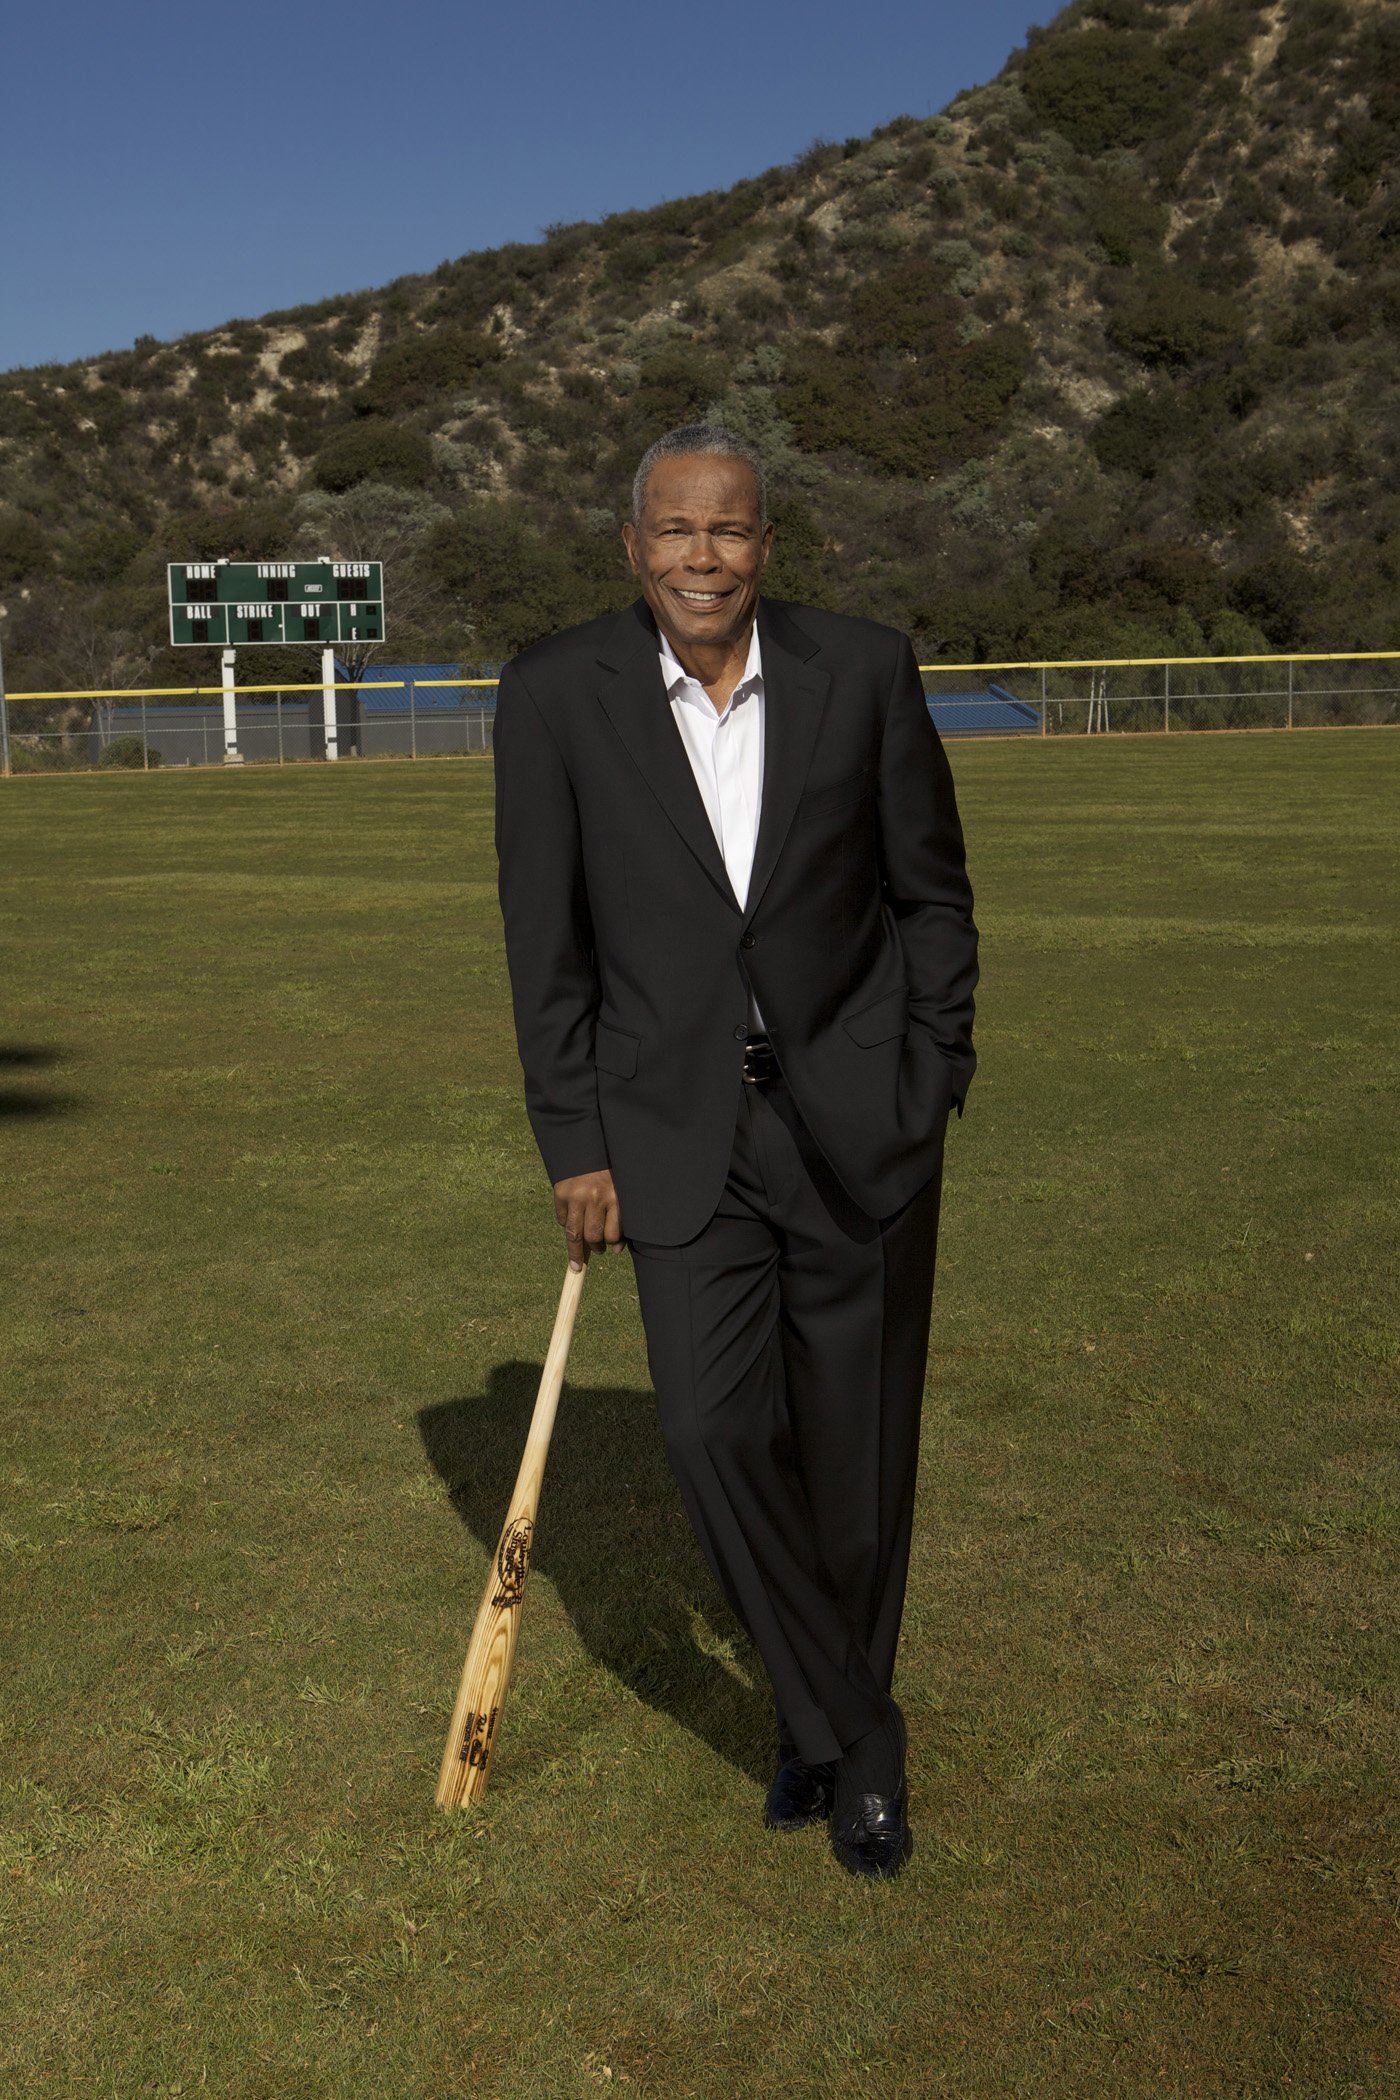 ANAHEIM, CA - APRIL 25: Hall of Fame Rod Carew stands with his